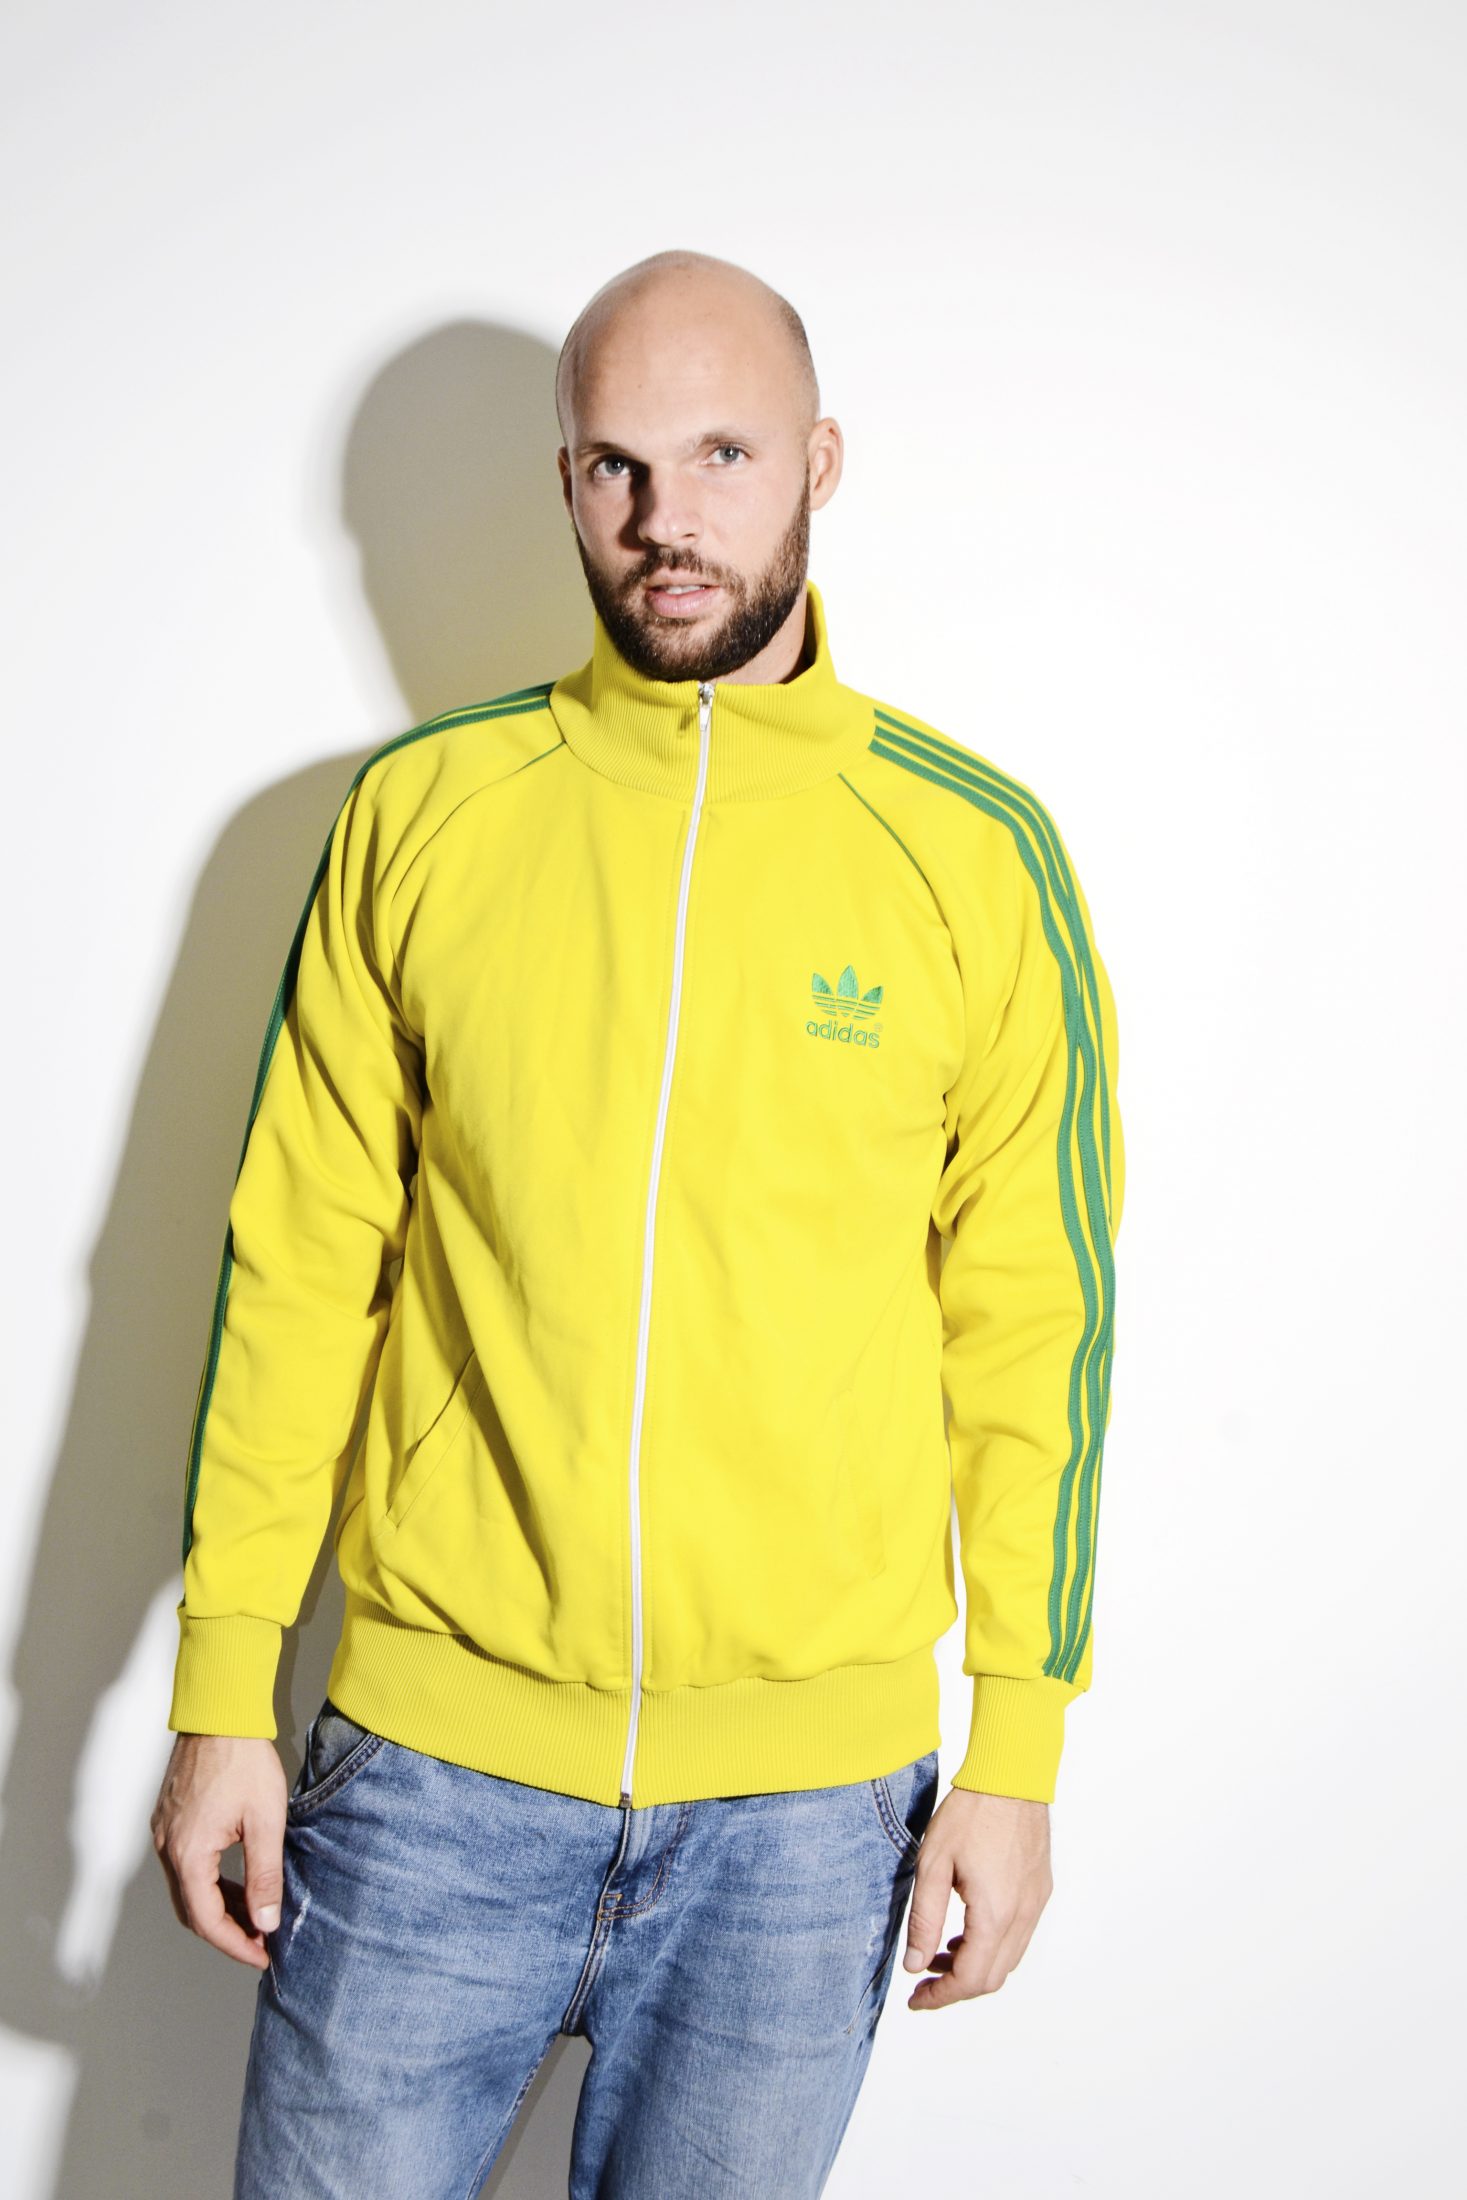 green and yellow adidas tracksuit